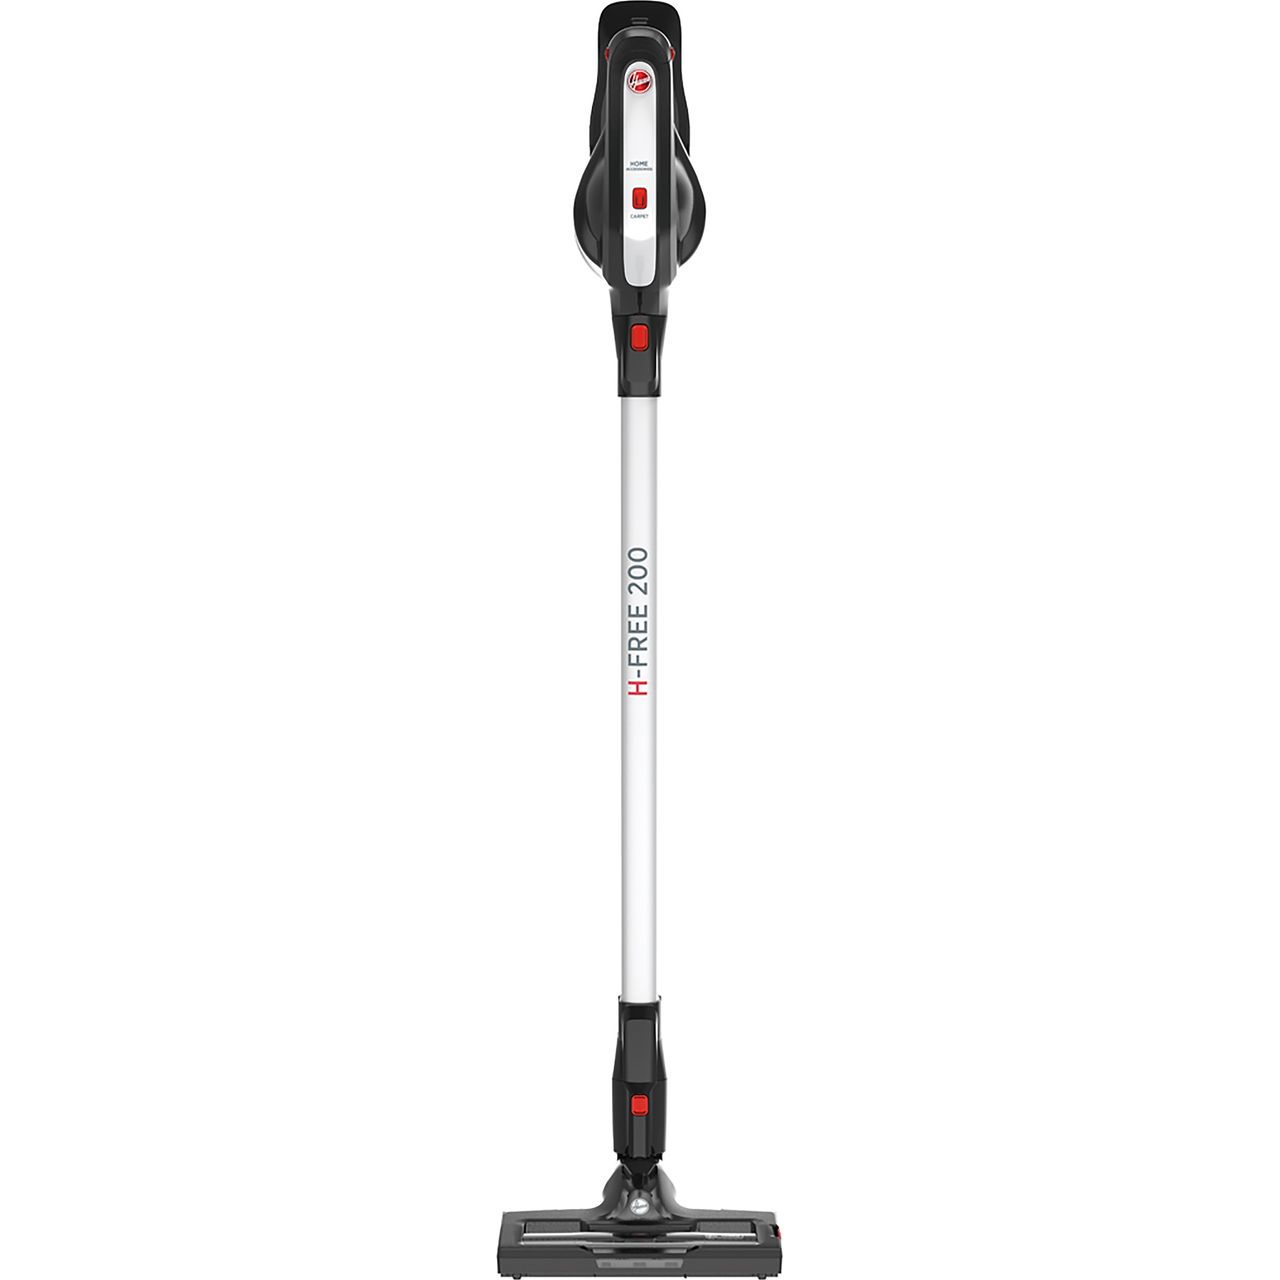 Hoover H-FREE 200 HF222RH Cordless Vacuum Cleaner with up to 40 Minutes Run Time Review